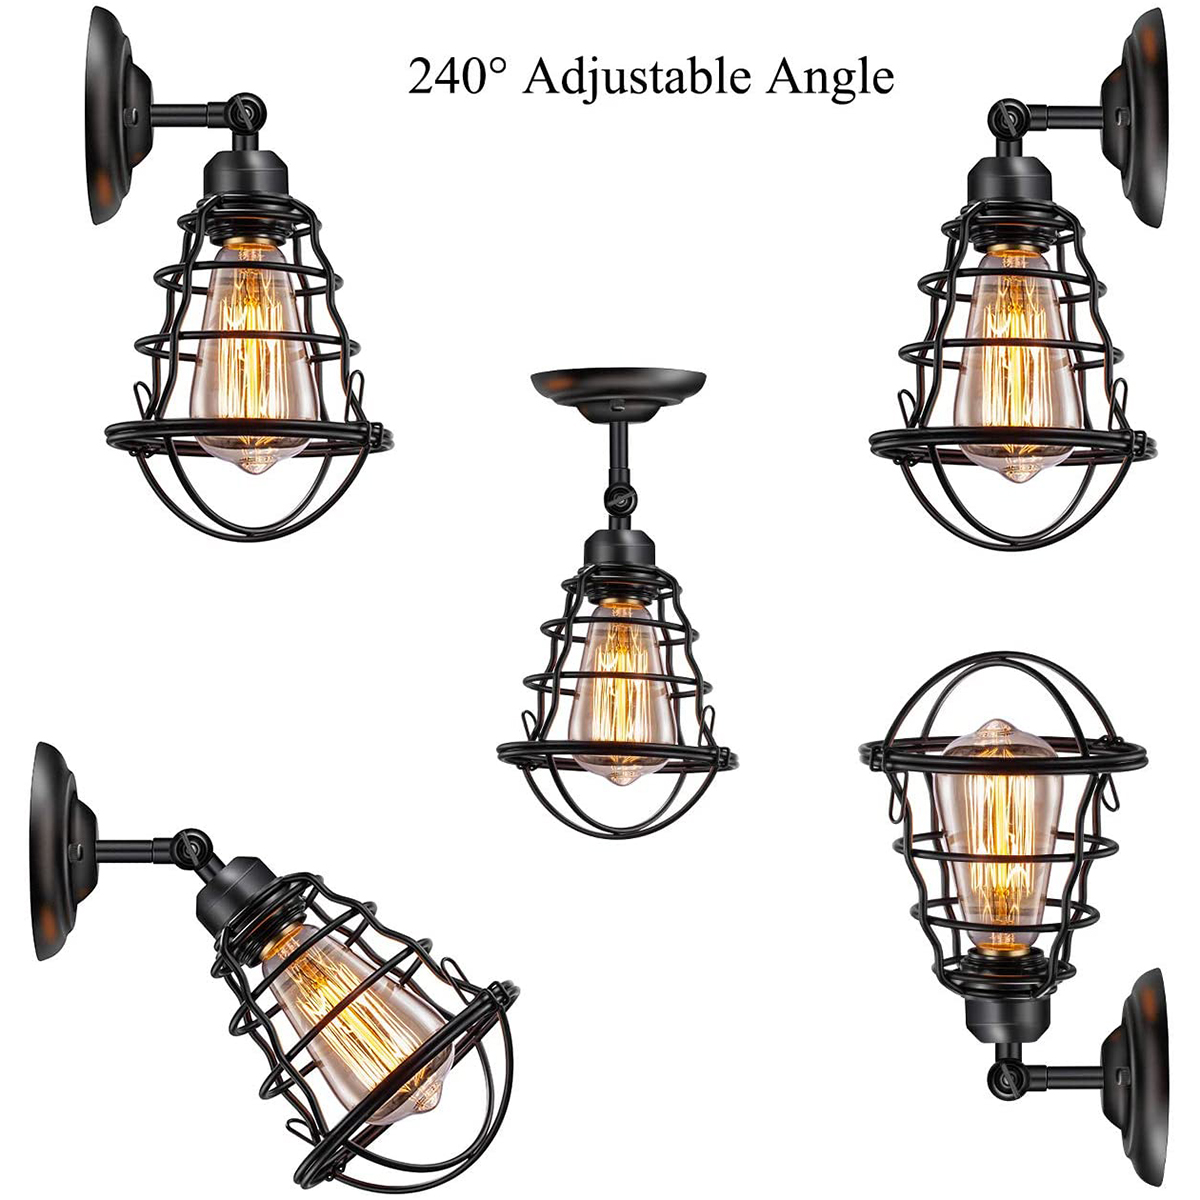 AC110V-E27-American-Style-Retro-Wall-Lamp-Industrial-Wrought-Iron-Lampshade-with-Switch-US-Plug-1762873-3